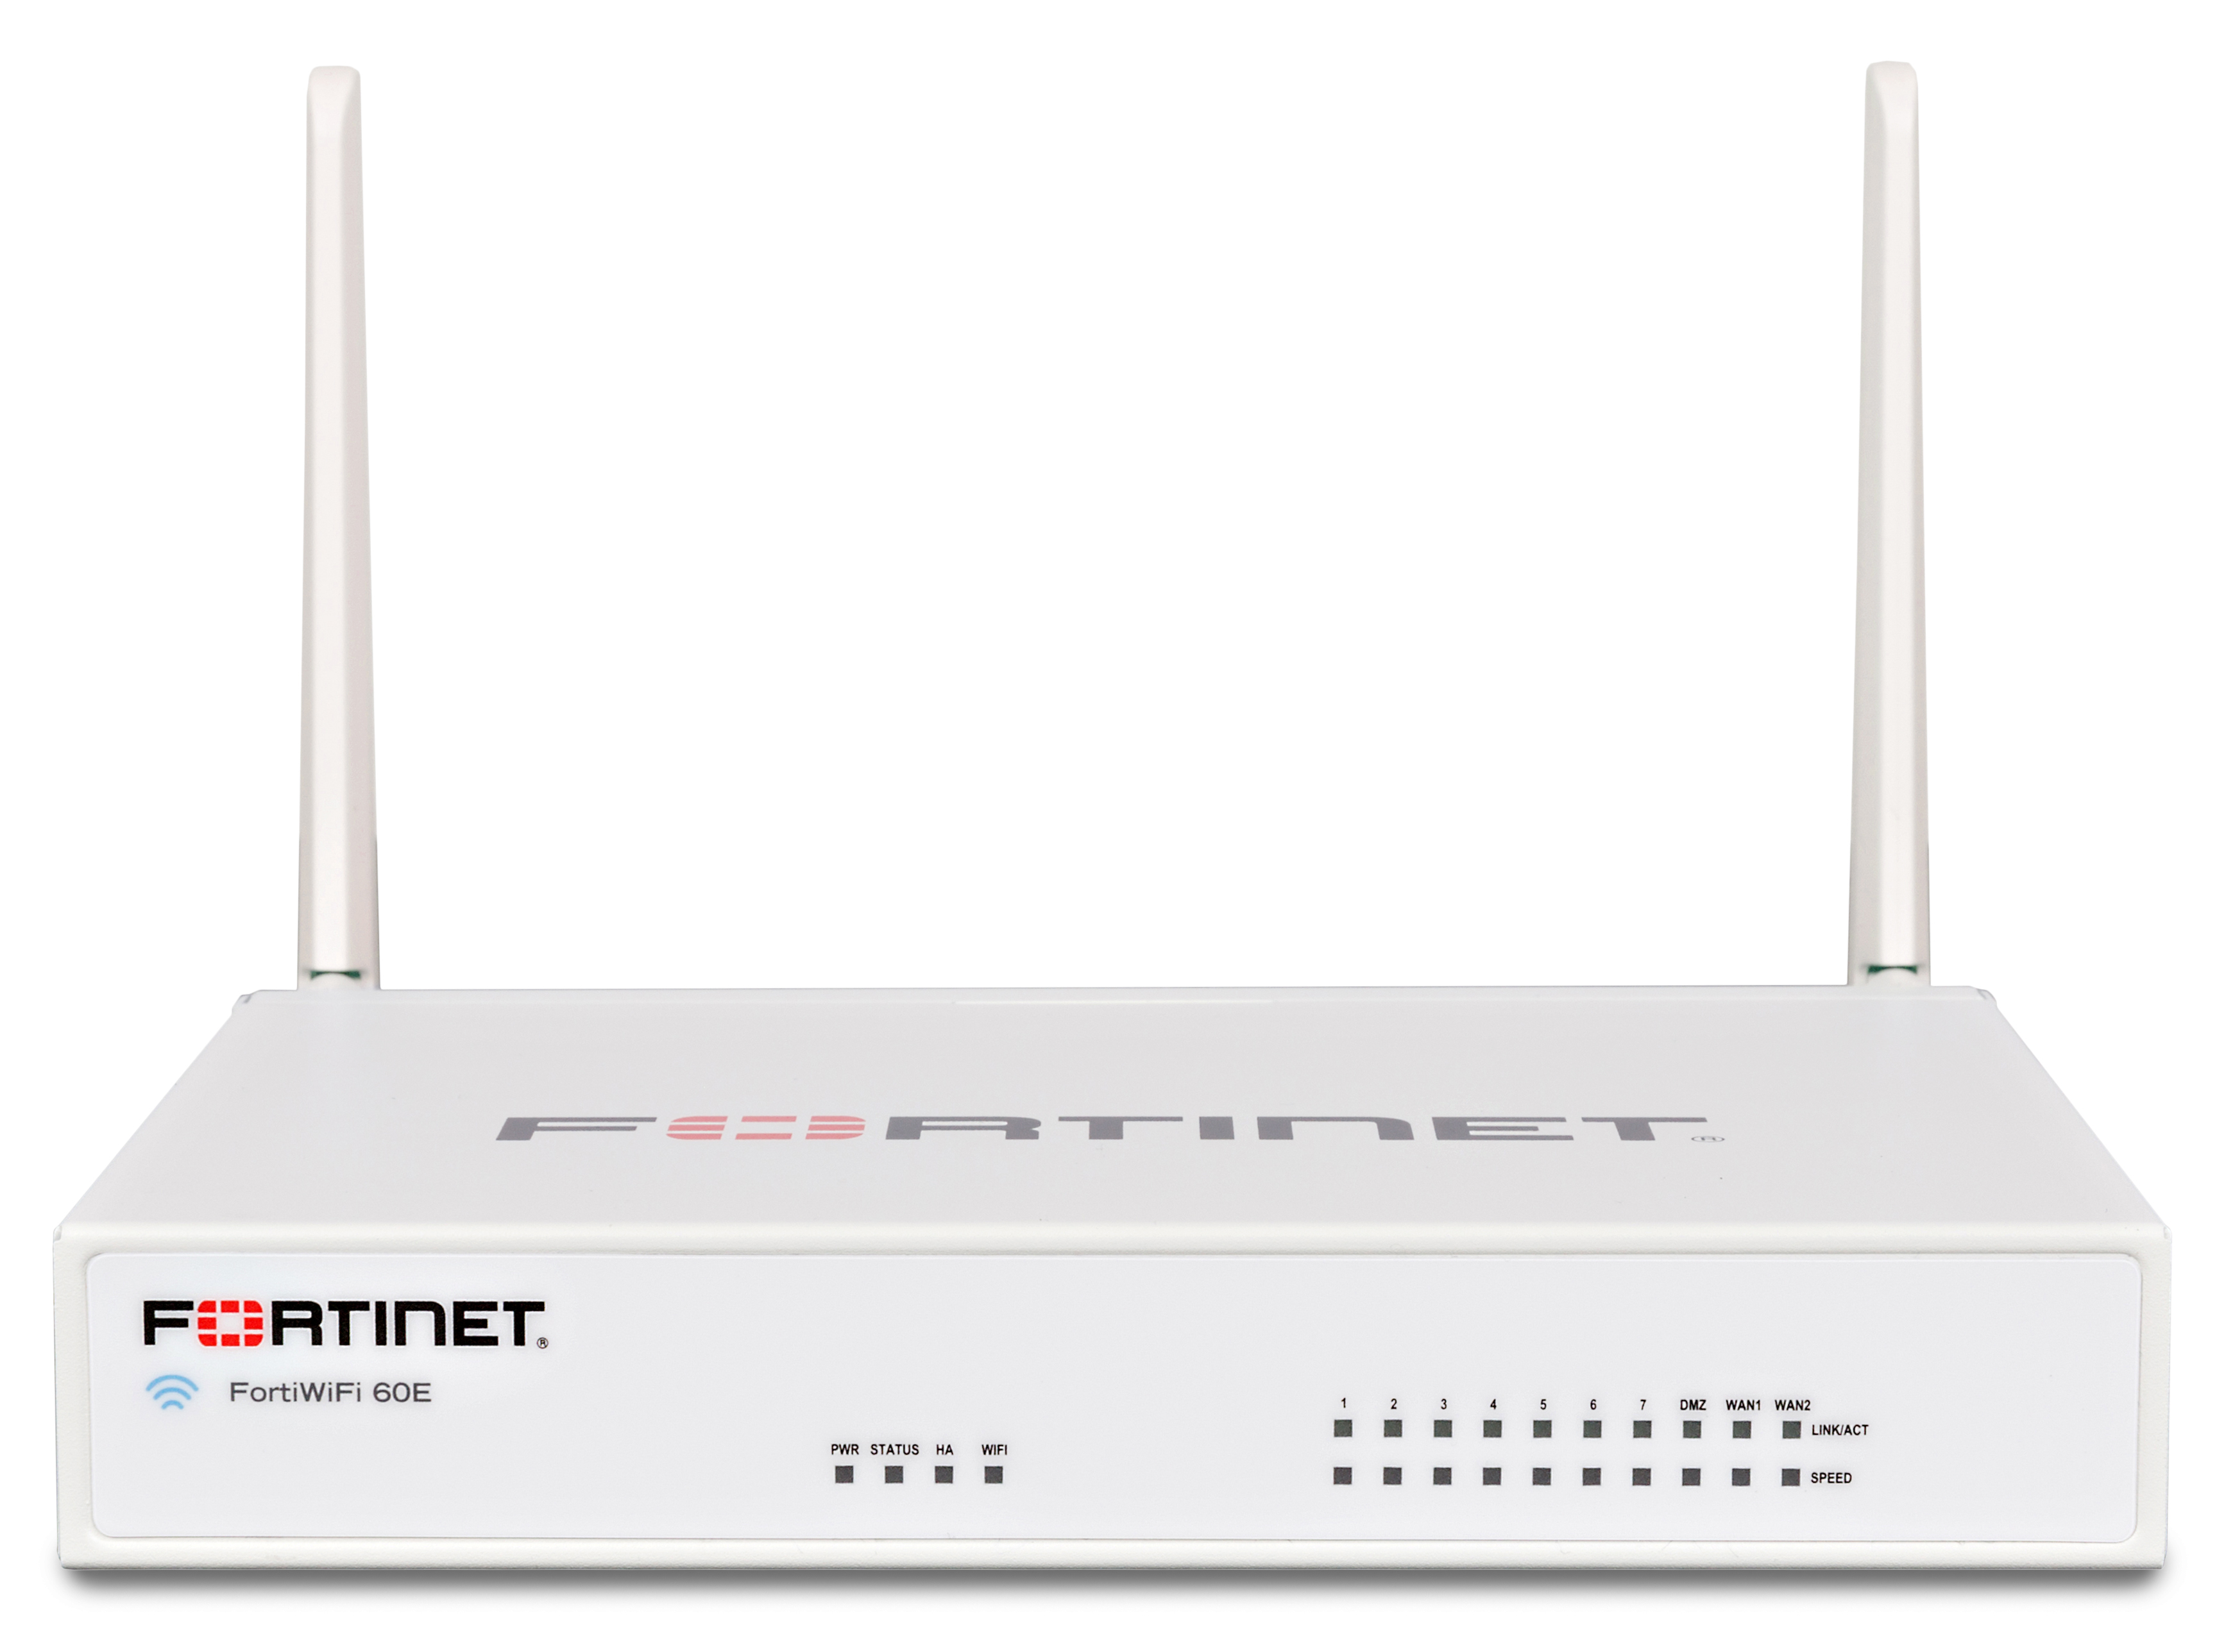 FC-10-W060E-950-02-12 Protection 24x7 FortiCare Plus Application Control, IPS, AV, Web Filtering and Antispam, FortiSandbox Cloud UTM Fortinet FortiWiFi-60E 1 Year Unified 